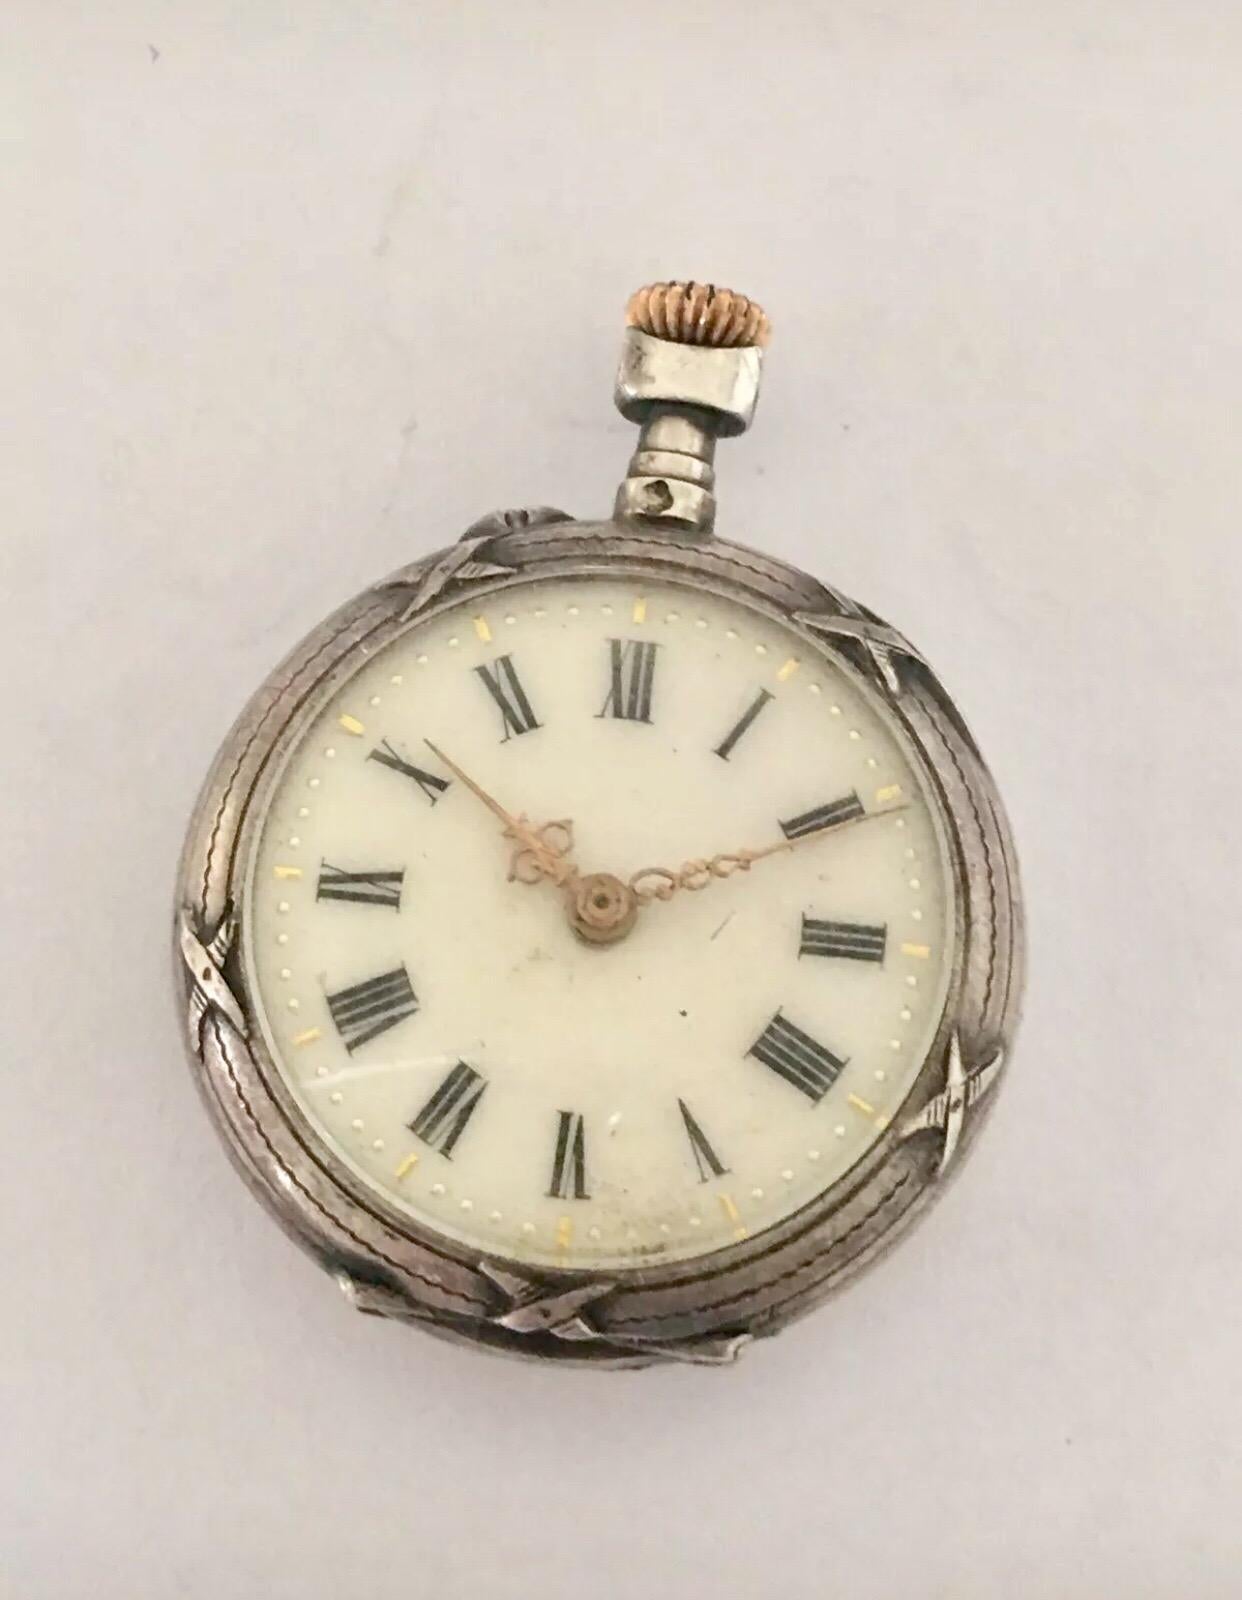 
Antique Small Silver Pocket / Fob watch


This beautifully engraved silver fob watch is working and ticking well. The loop or metal ring on top of the stem is missing.